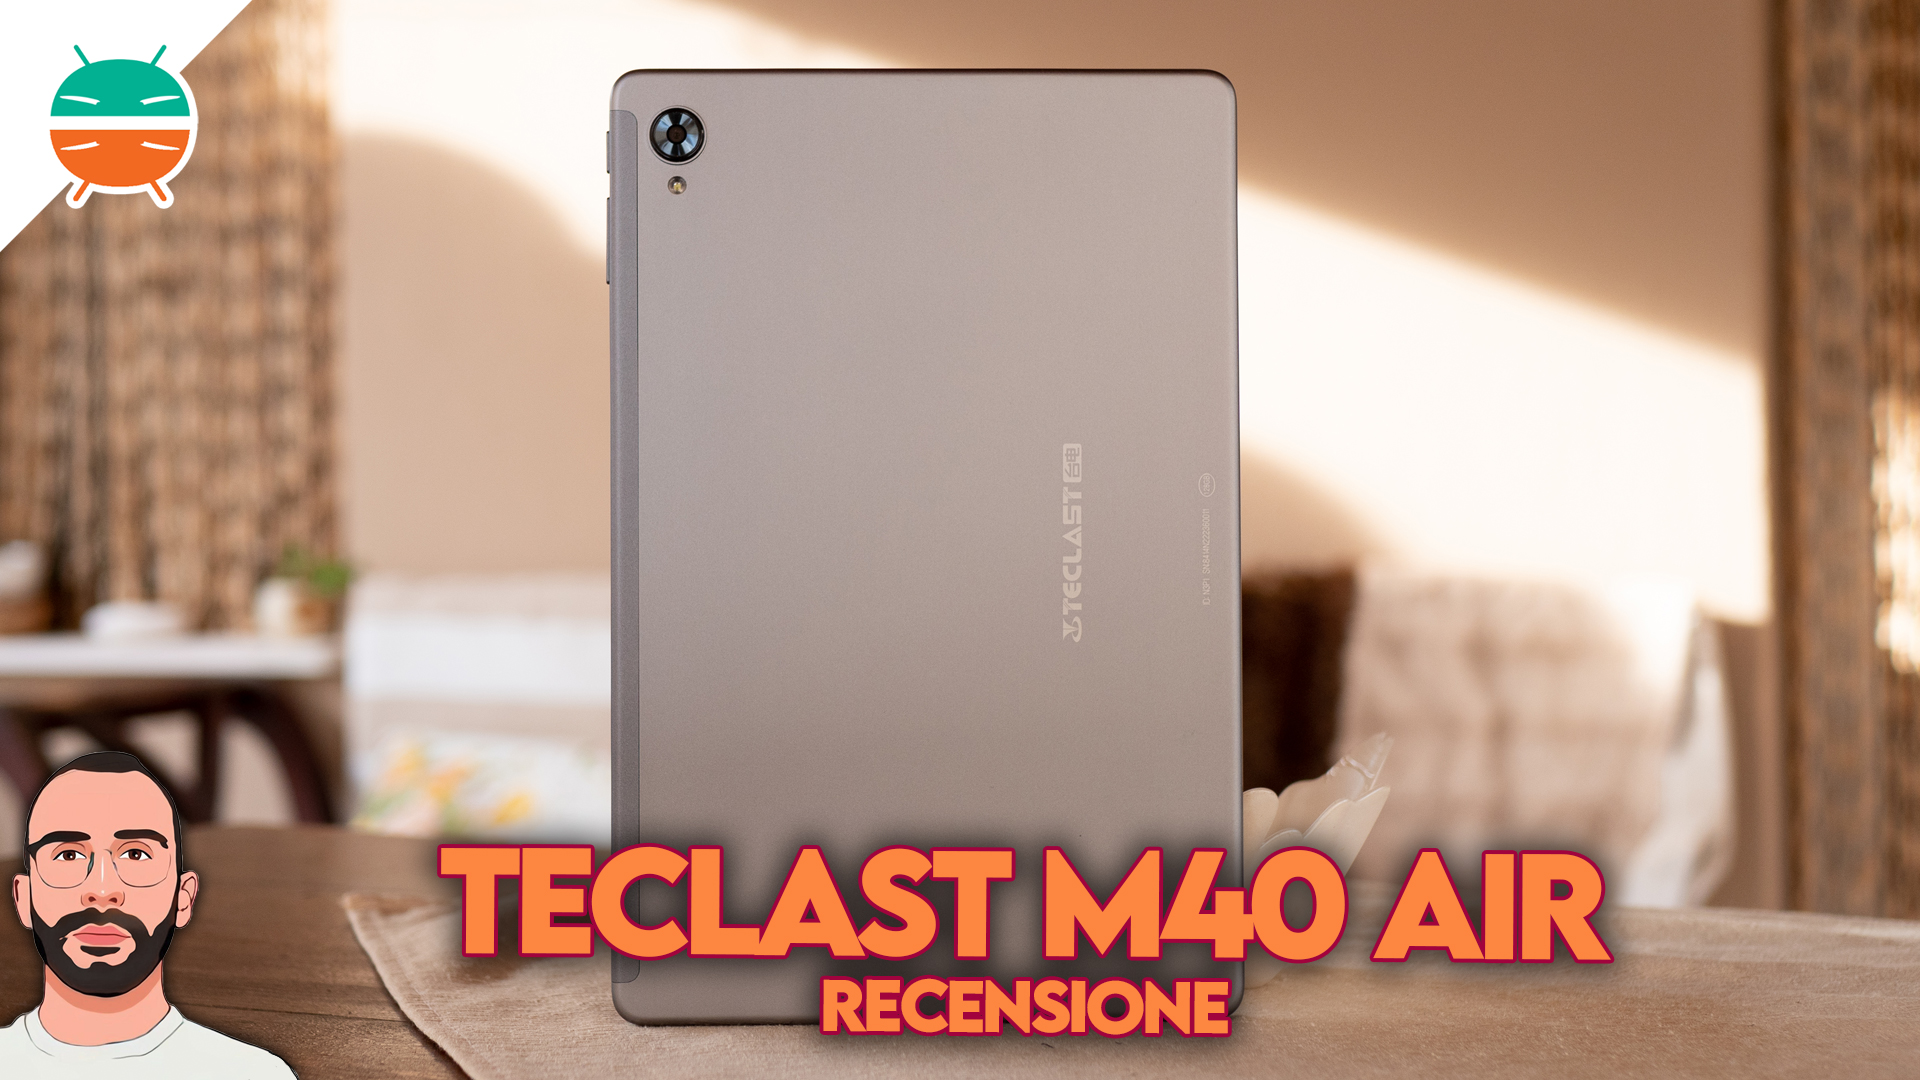 Teclast M40 AIR review: economic yes, but OF SUBSTANCE! - GizChina.it